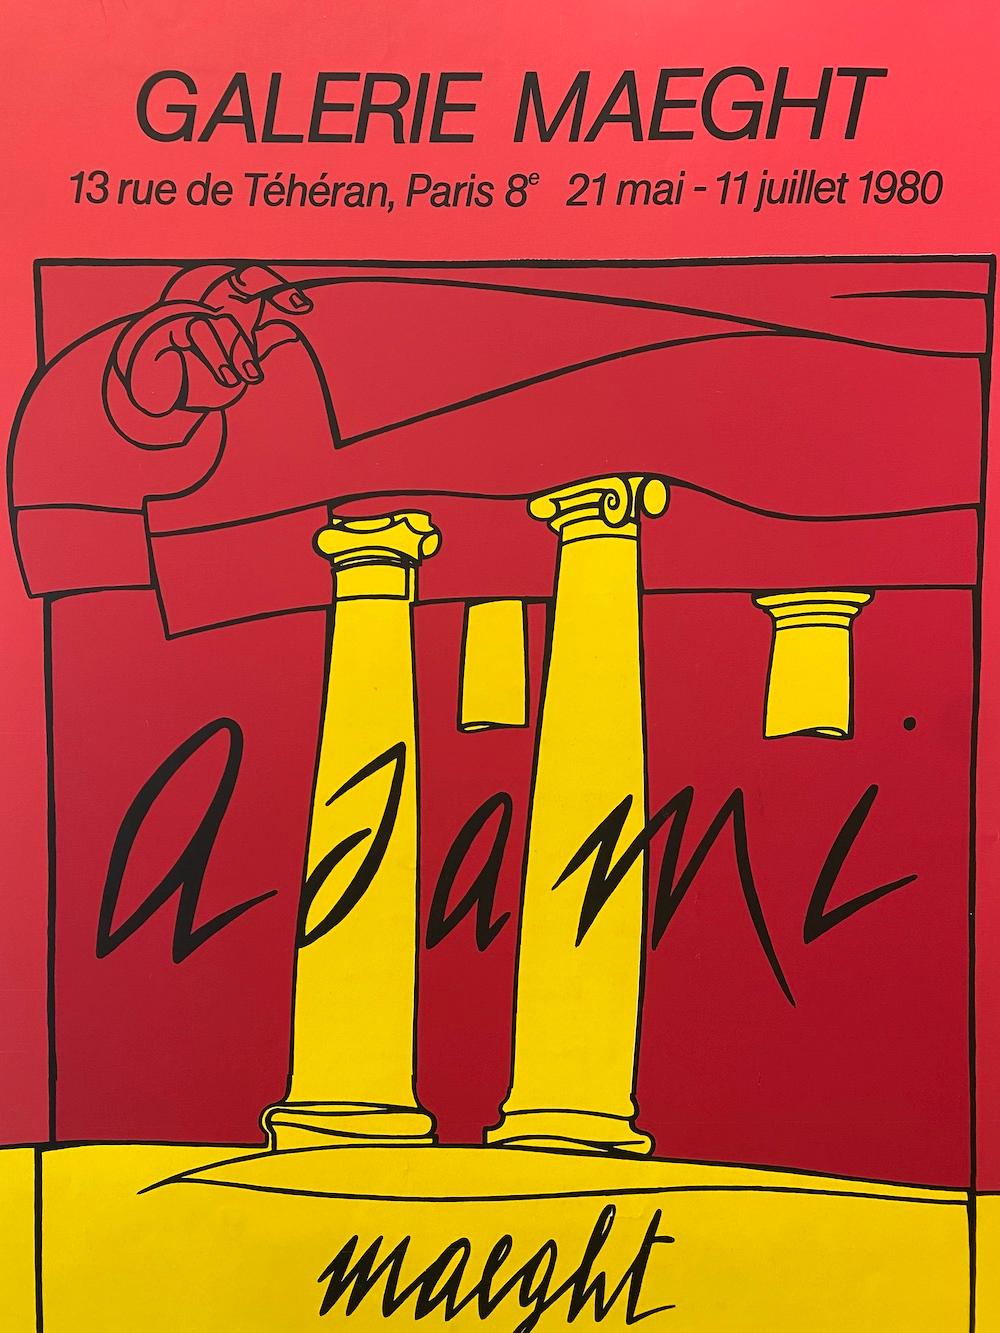 Adami Galerie Maeght original vintage poster. This poster has been linen backed for preservation, it is in excellent condition. 


ARTIST	
Adami

YEAR	
1980

DIMENSIONS	
169 x 126cm

CONDITION	
Good

FORMAT	
Linen Backed

